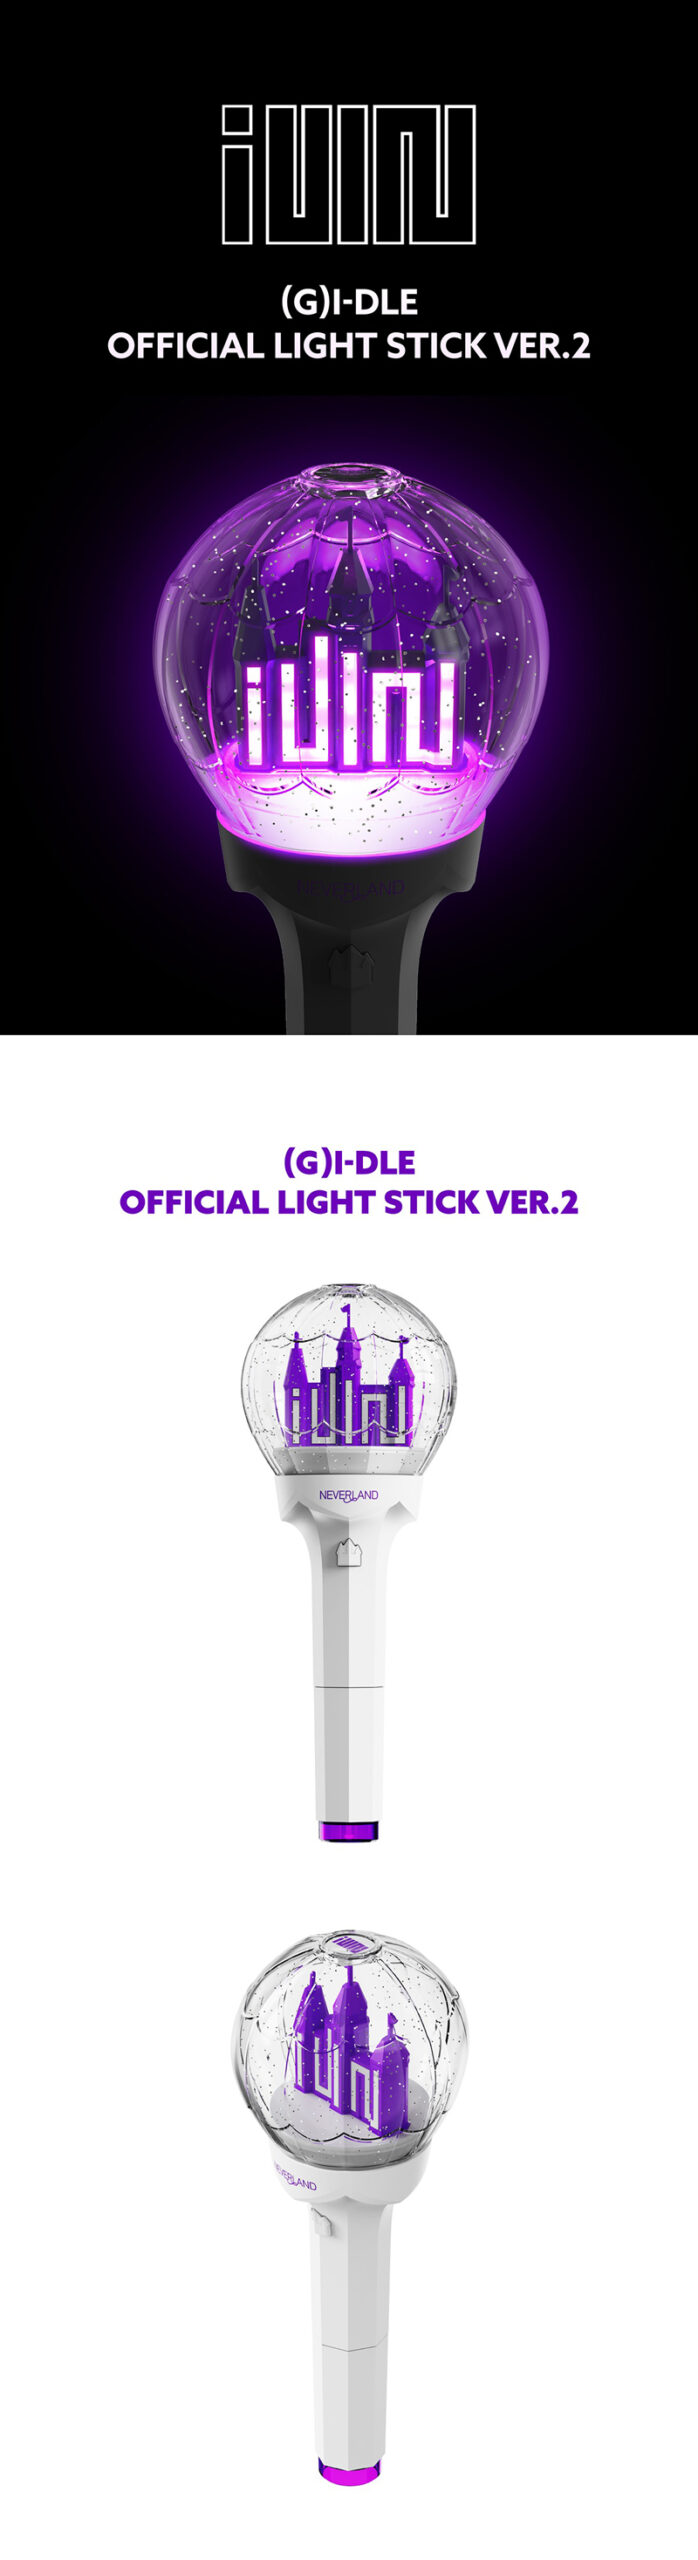 G)I-DLE OFFICIAL LIGHT STICK Ver.2 / 公式ペンライトVer.2 | てちゅ ...